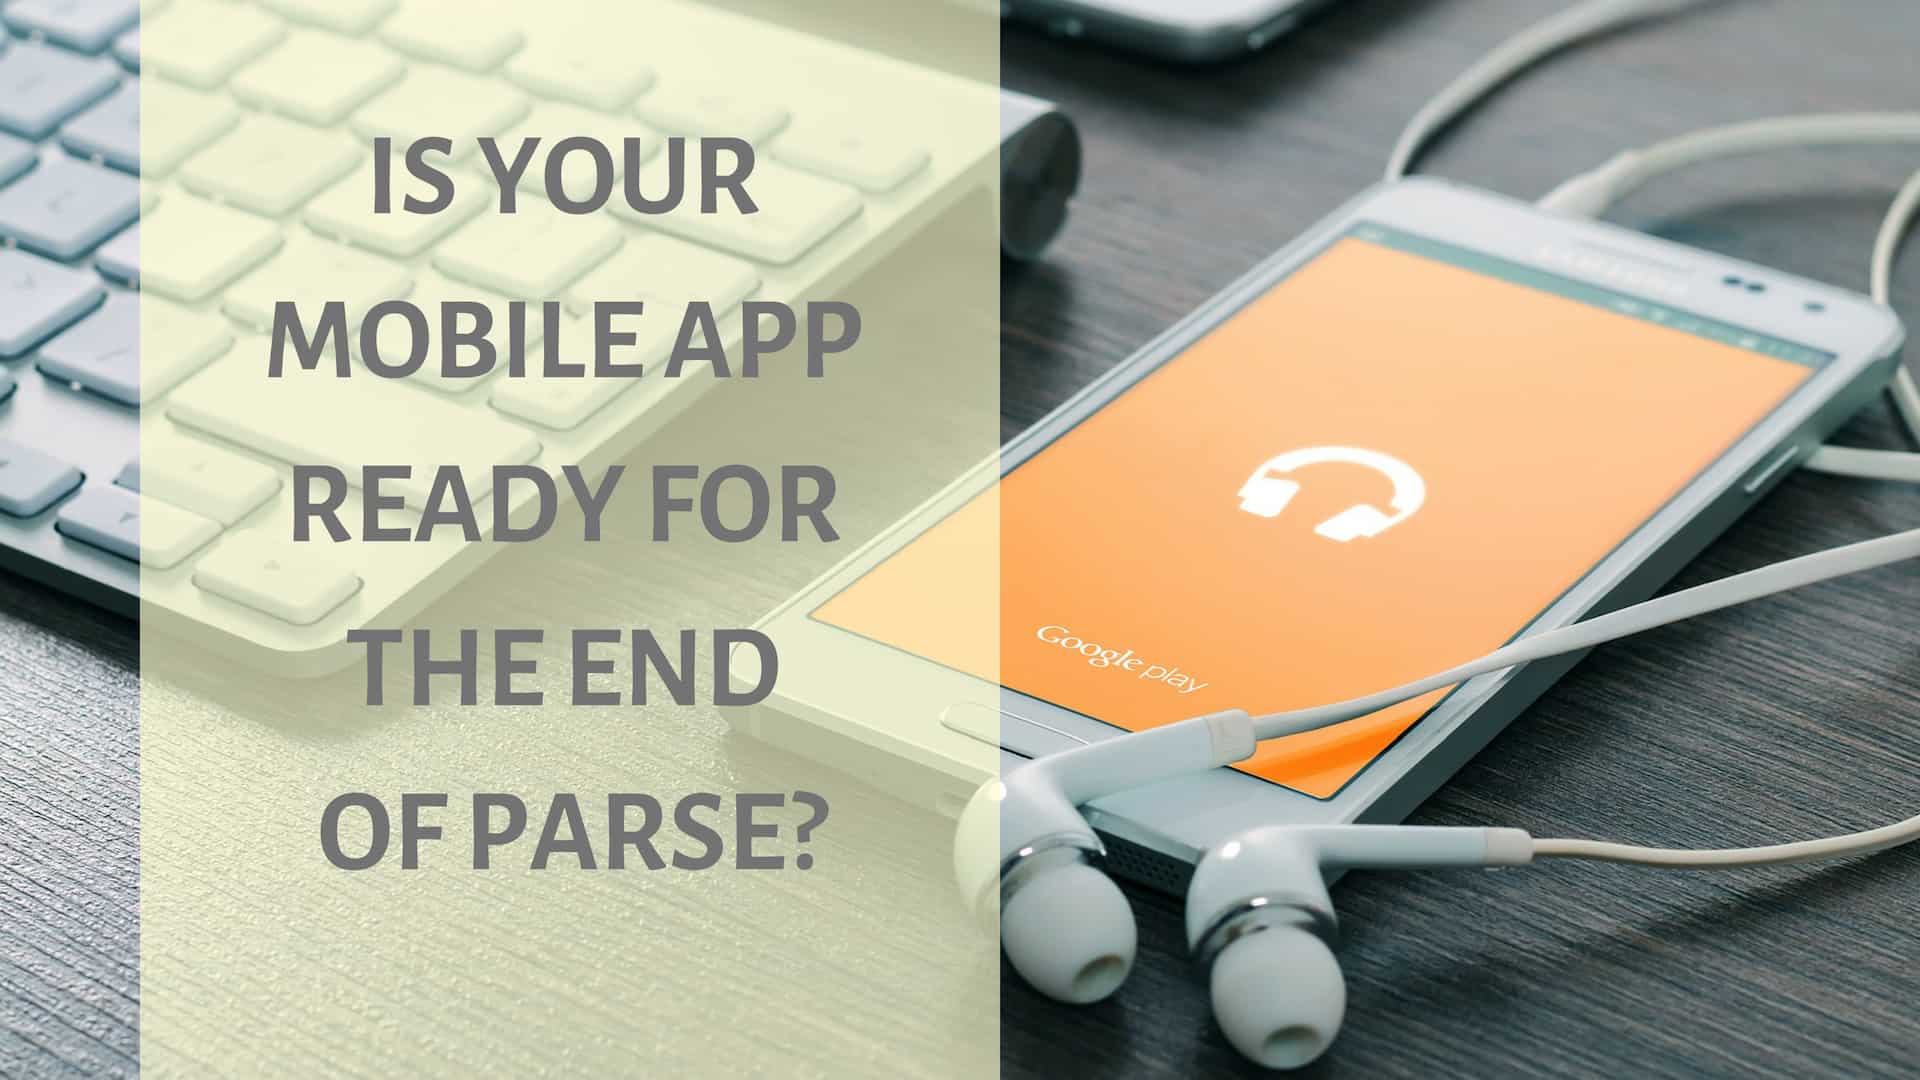 Is Your Mobile App Ready For The End Of Parse?